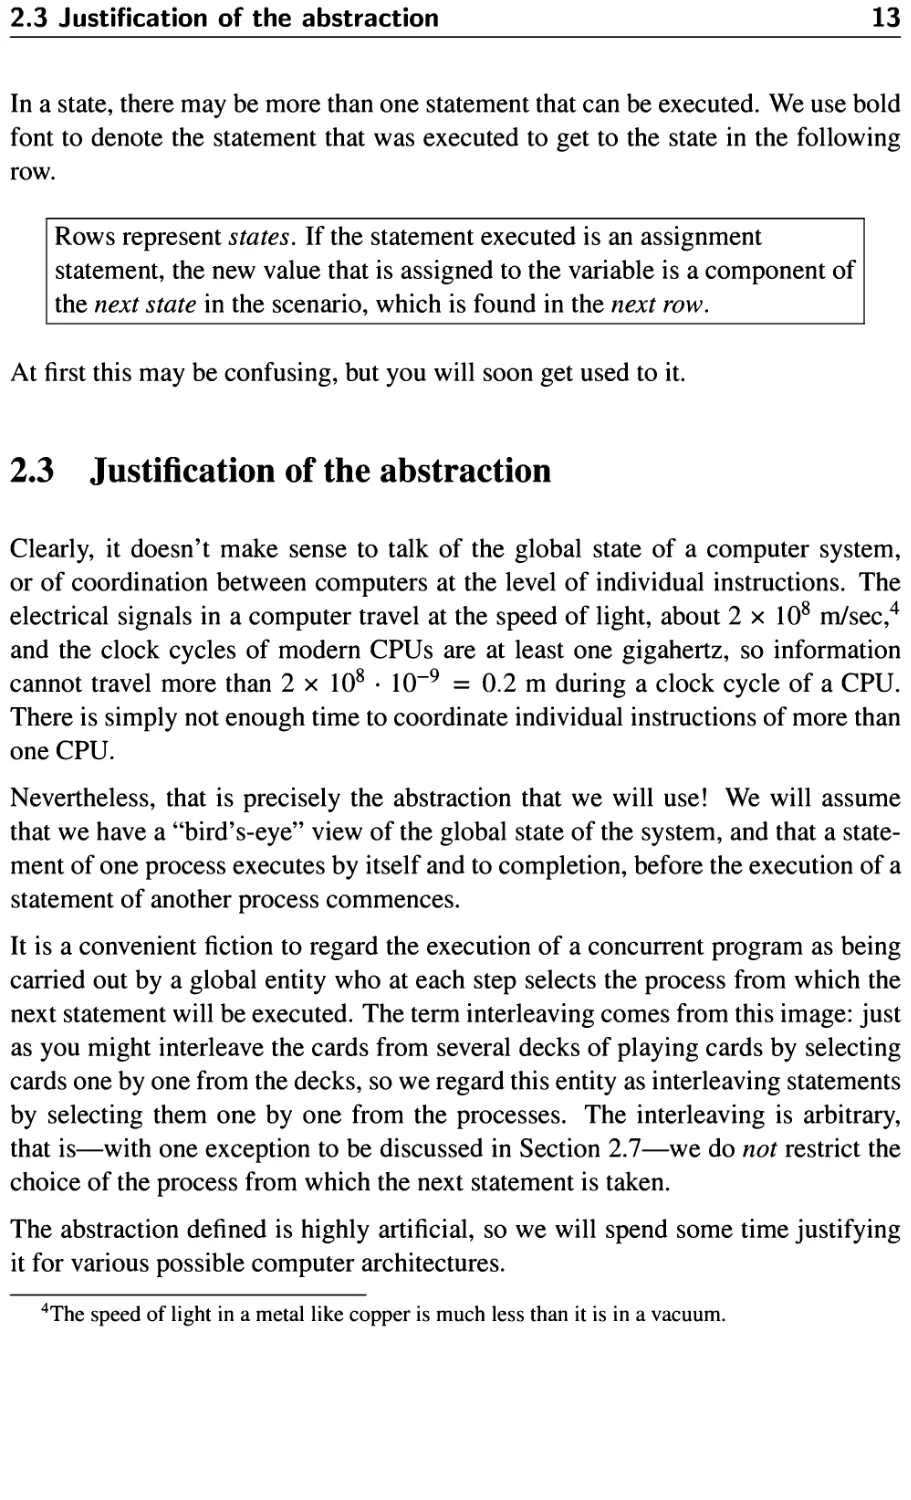 2.3 Justification of the abstraction